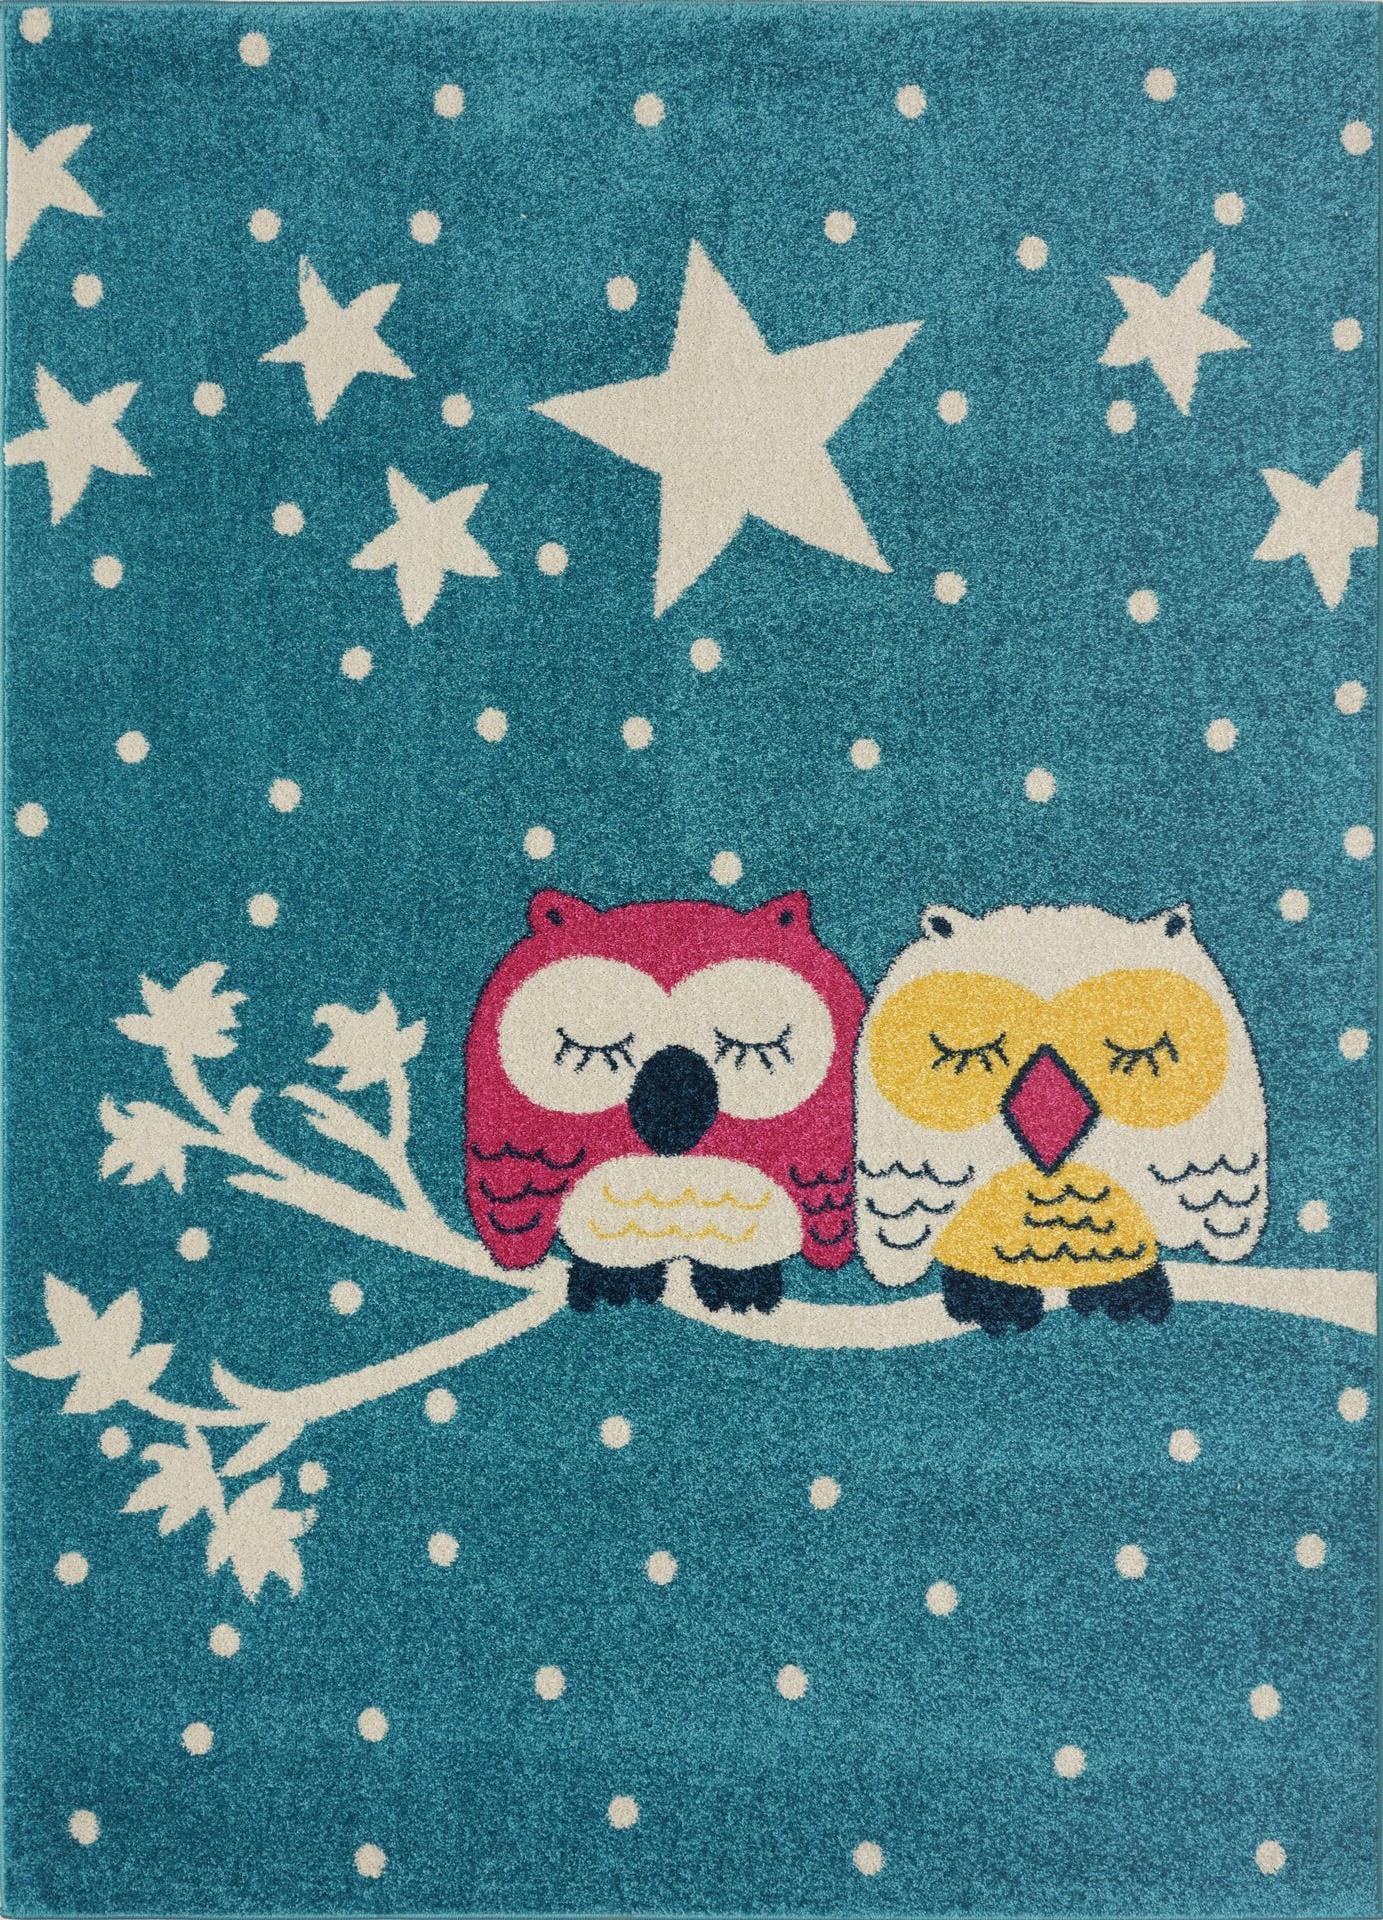 Kids Round Floor Mat Tree Branches Cute Owl Couple Hearts Living Room Area Rugs 